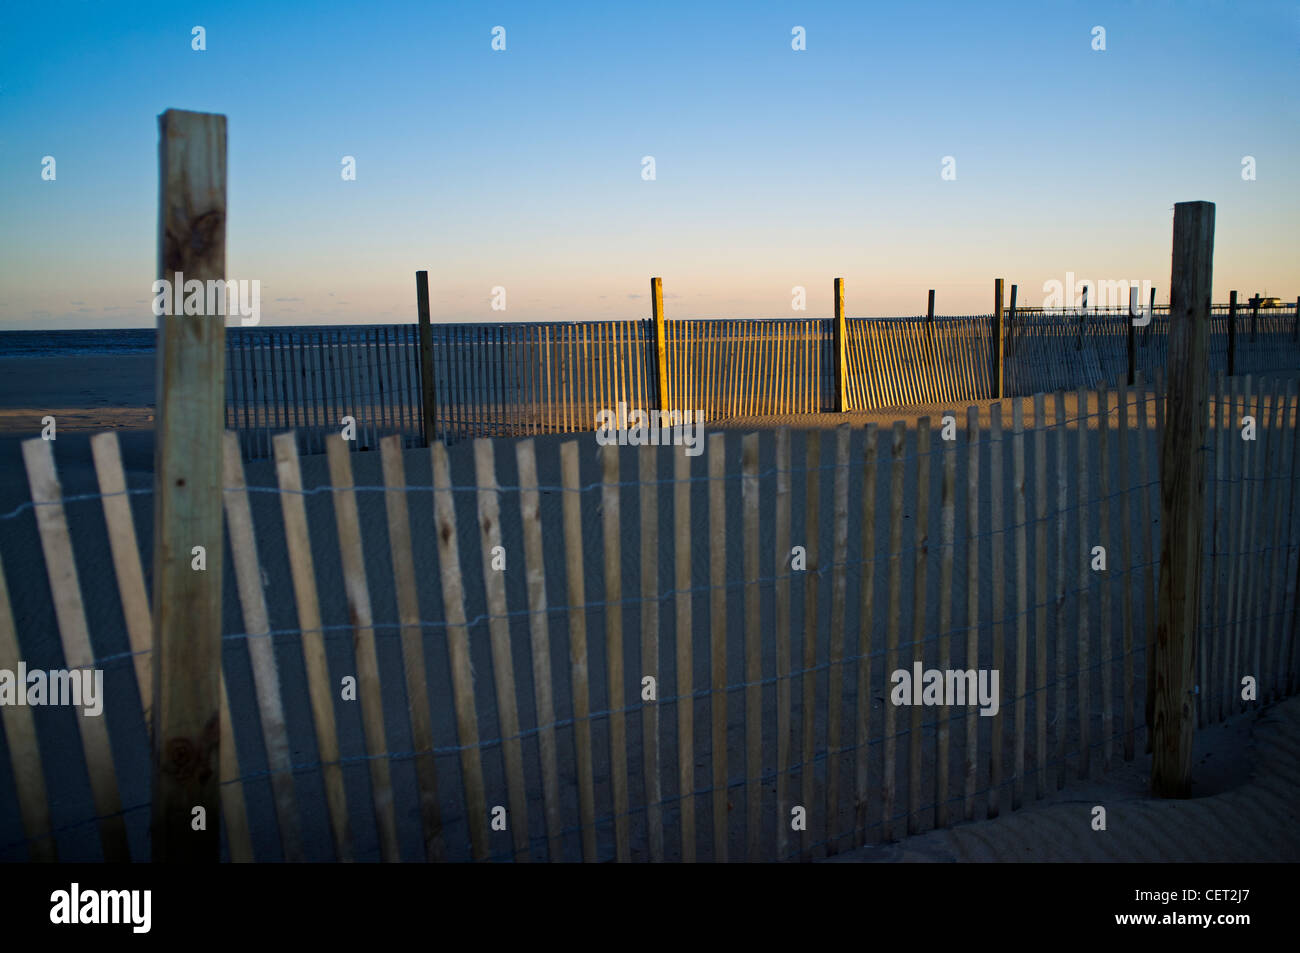 A windbreak fence on the beach at sunset in Ocean City Maryland, USA Stock Photo